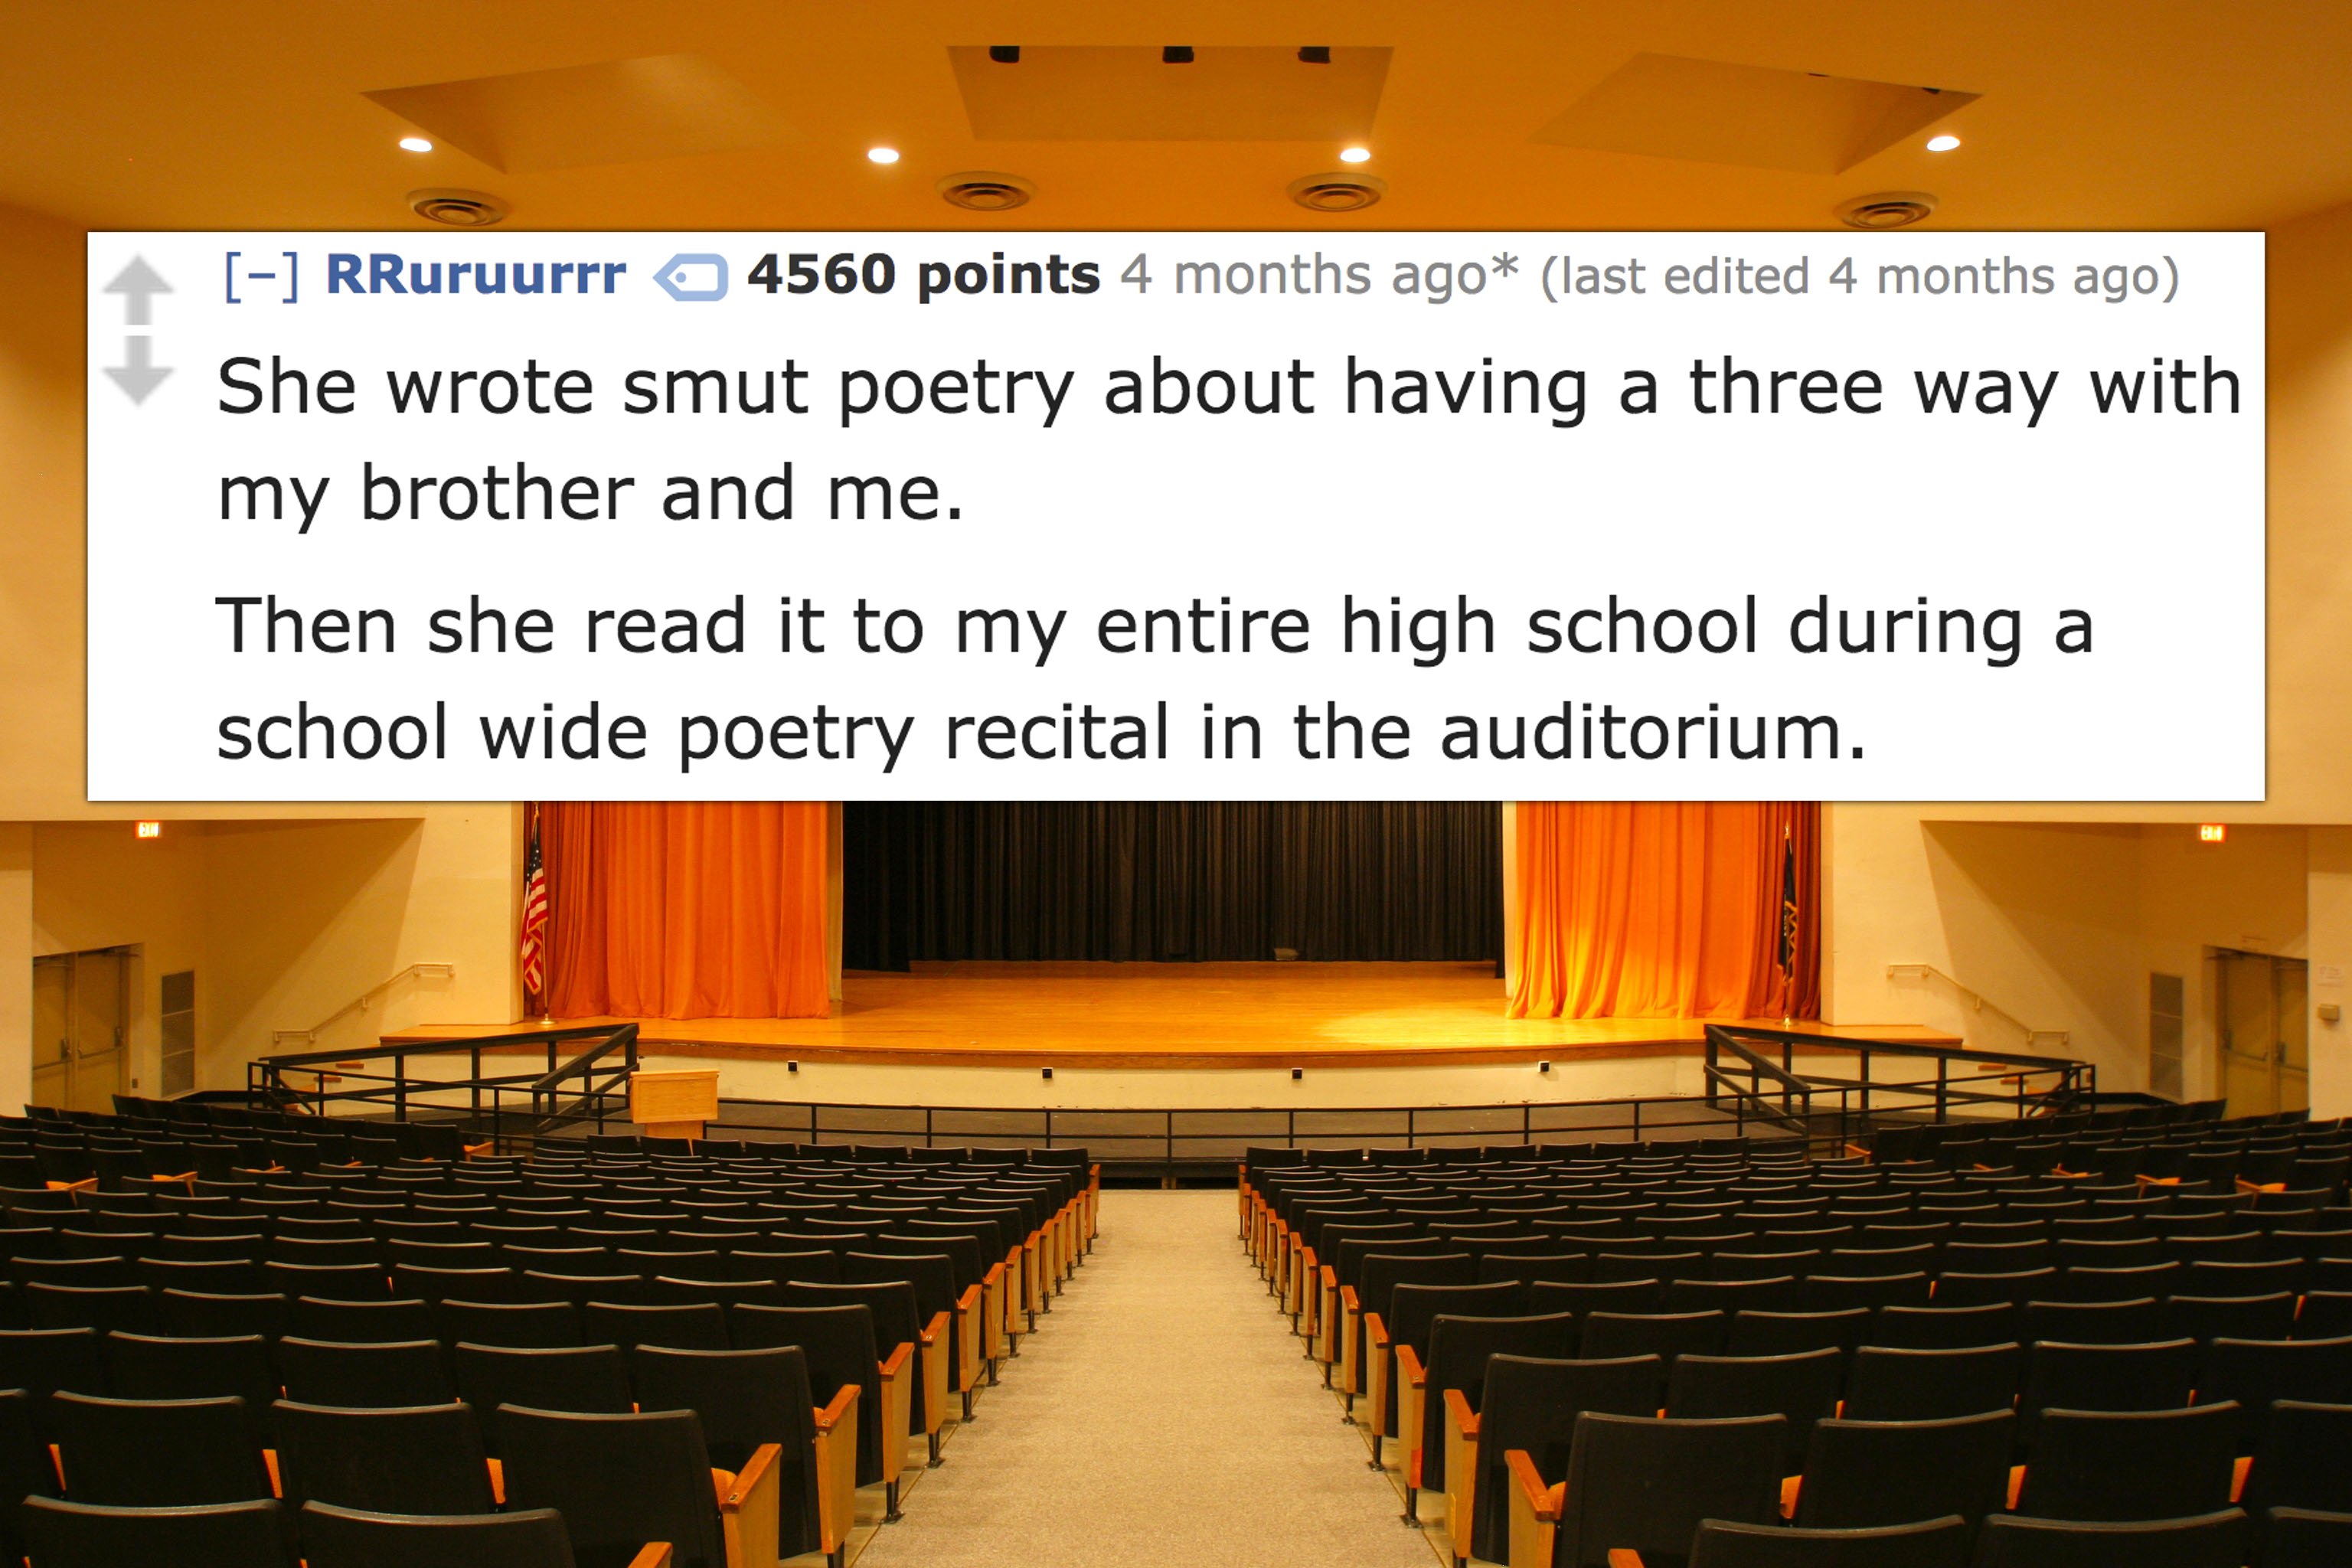 auditorium - RRuruurrr a 4560 points 4 months ago last edited 4 months ago She wrote smut poetry about having a three way with my brother and me. Then she read it to my entire high school during a school wide poetry recital in the auditorium. Ten